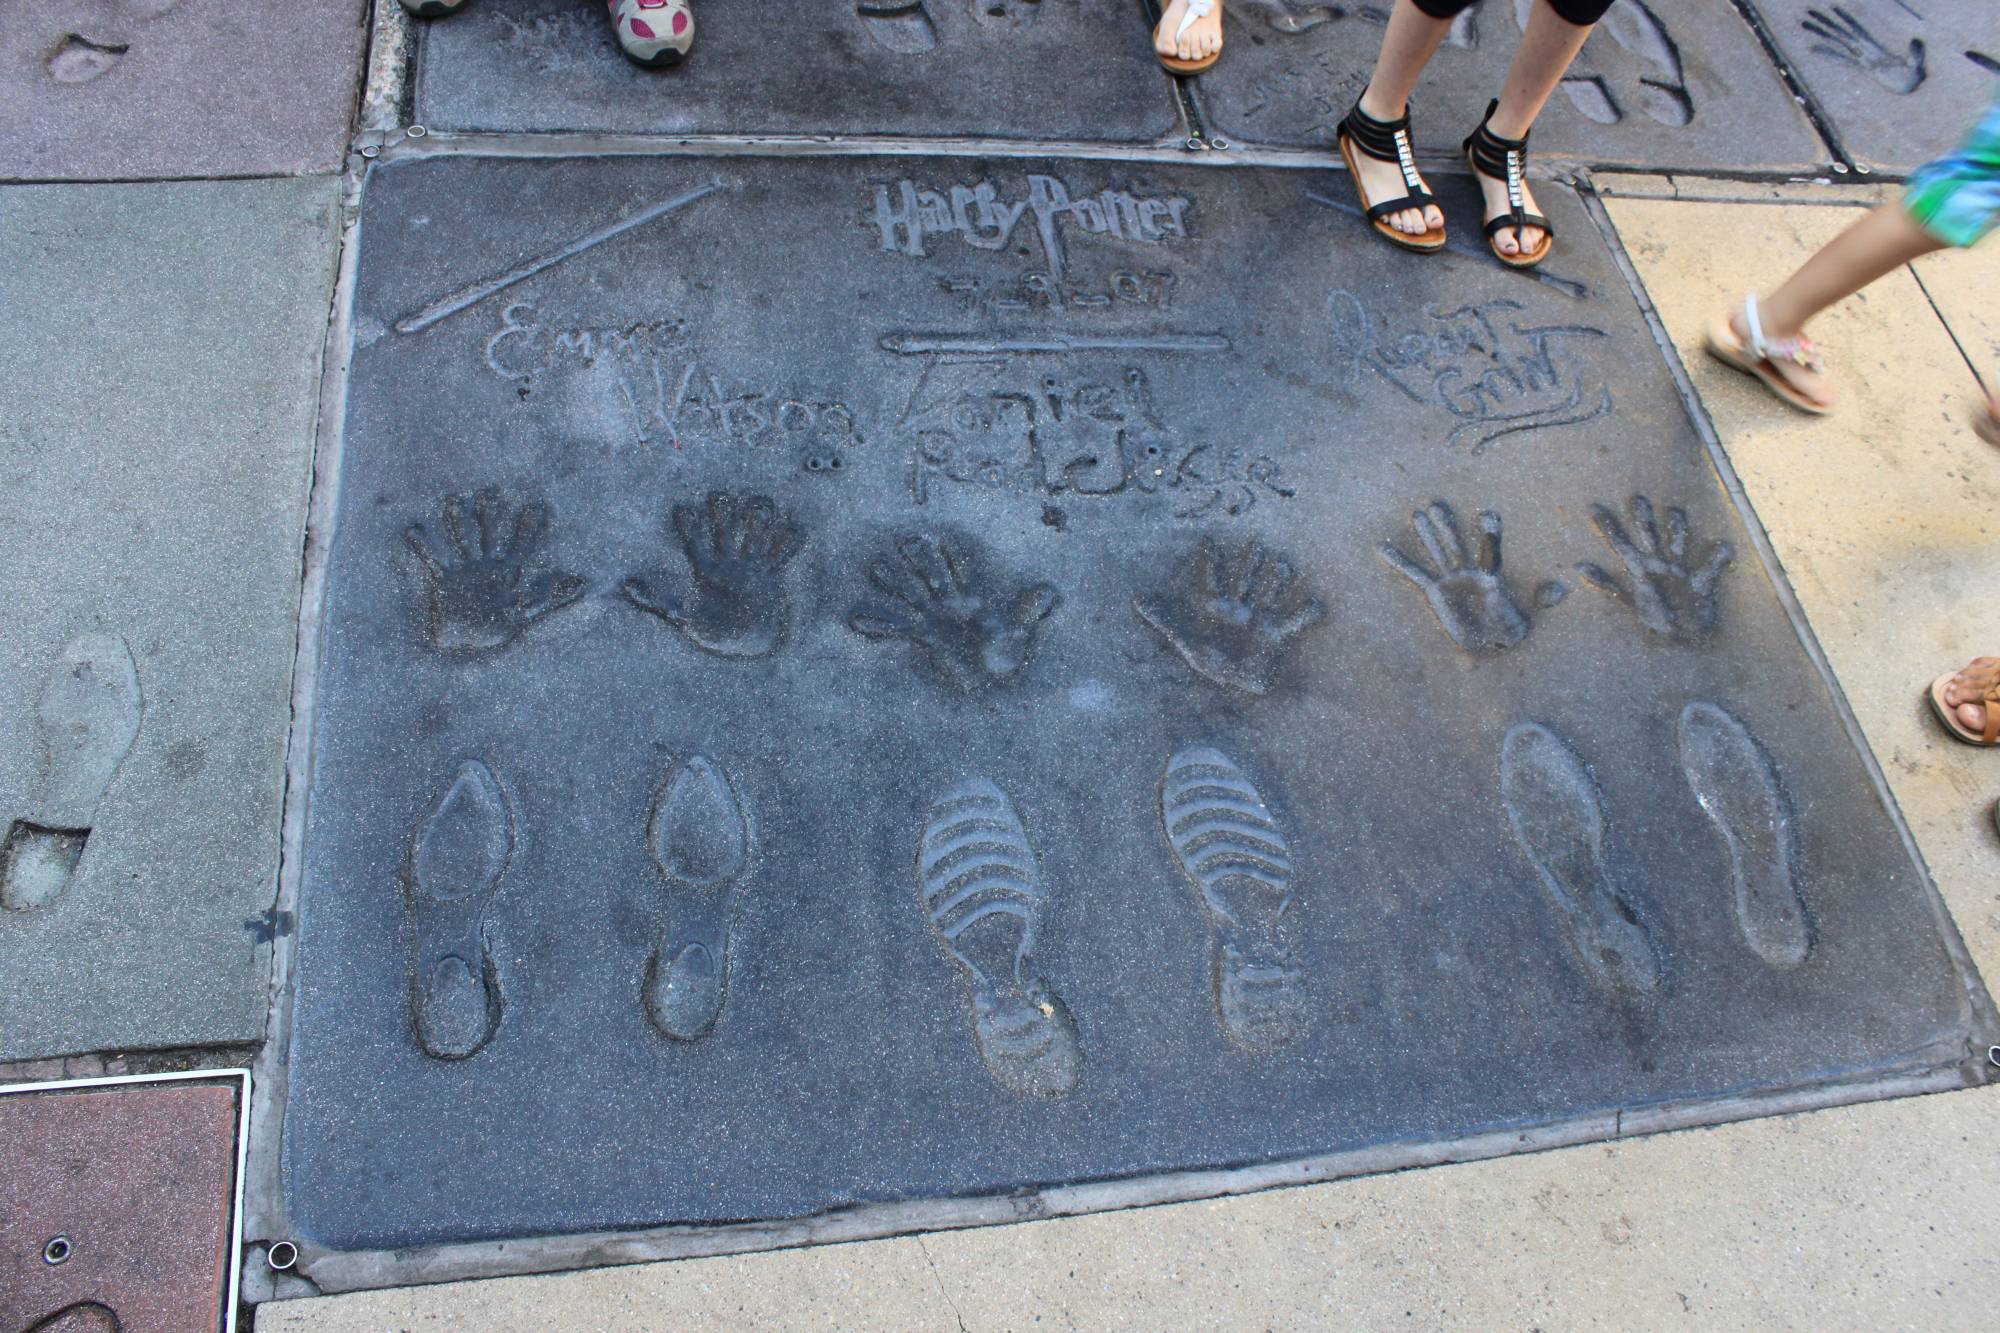 Harry Potter cast - handprints in Chinese Theater courtyard